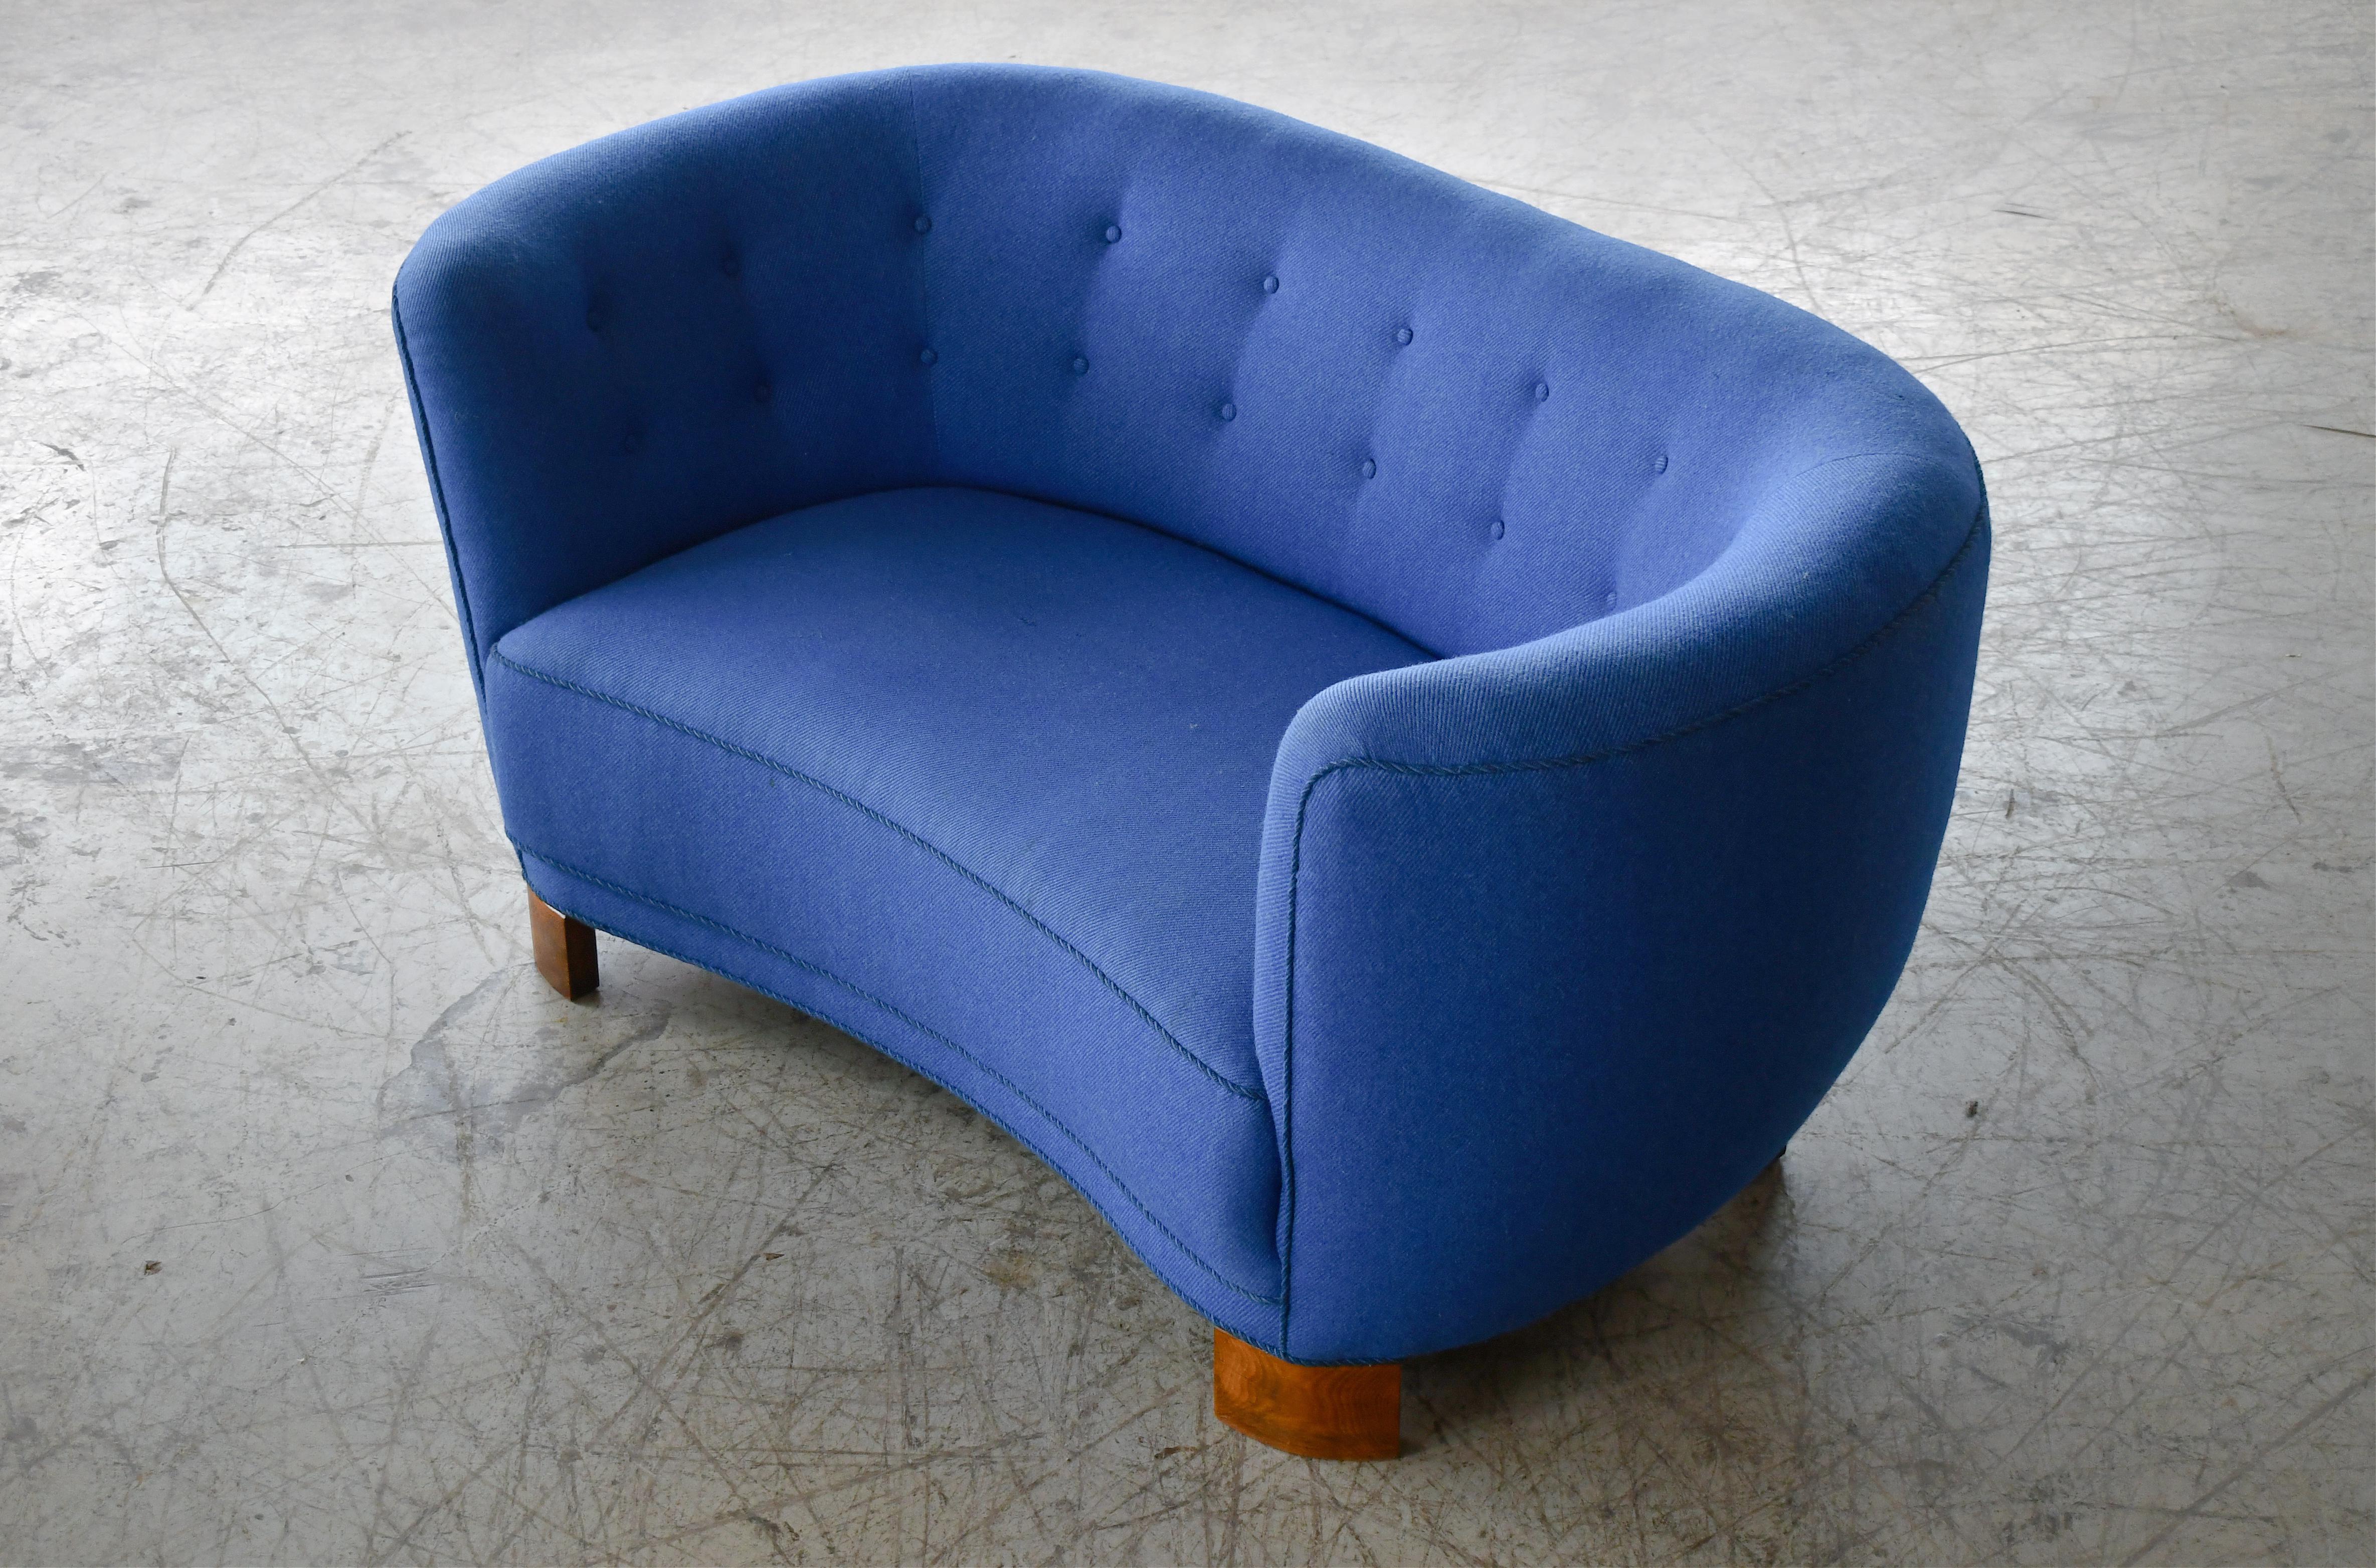 Mid-20th Century Curved Banana Shape Loveseat or Sofa Denmark, 1940s in Blue Wool